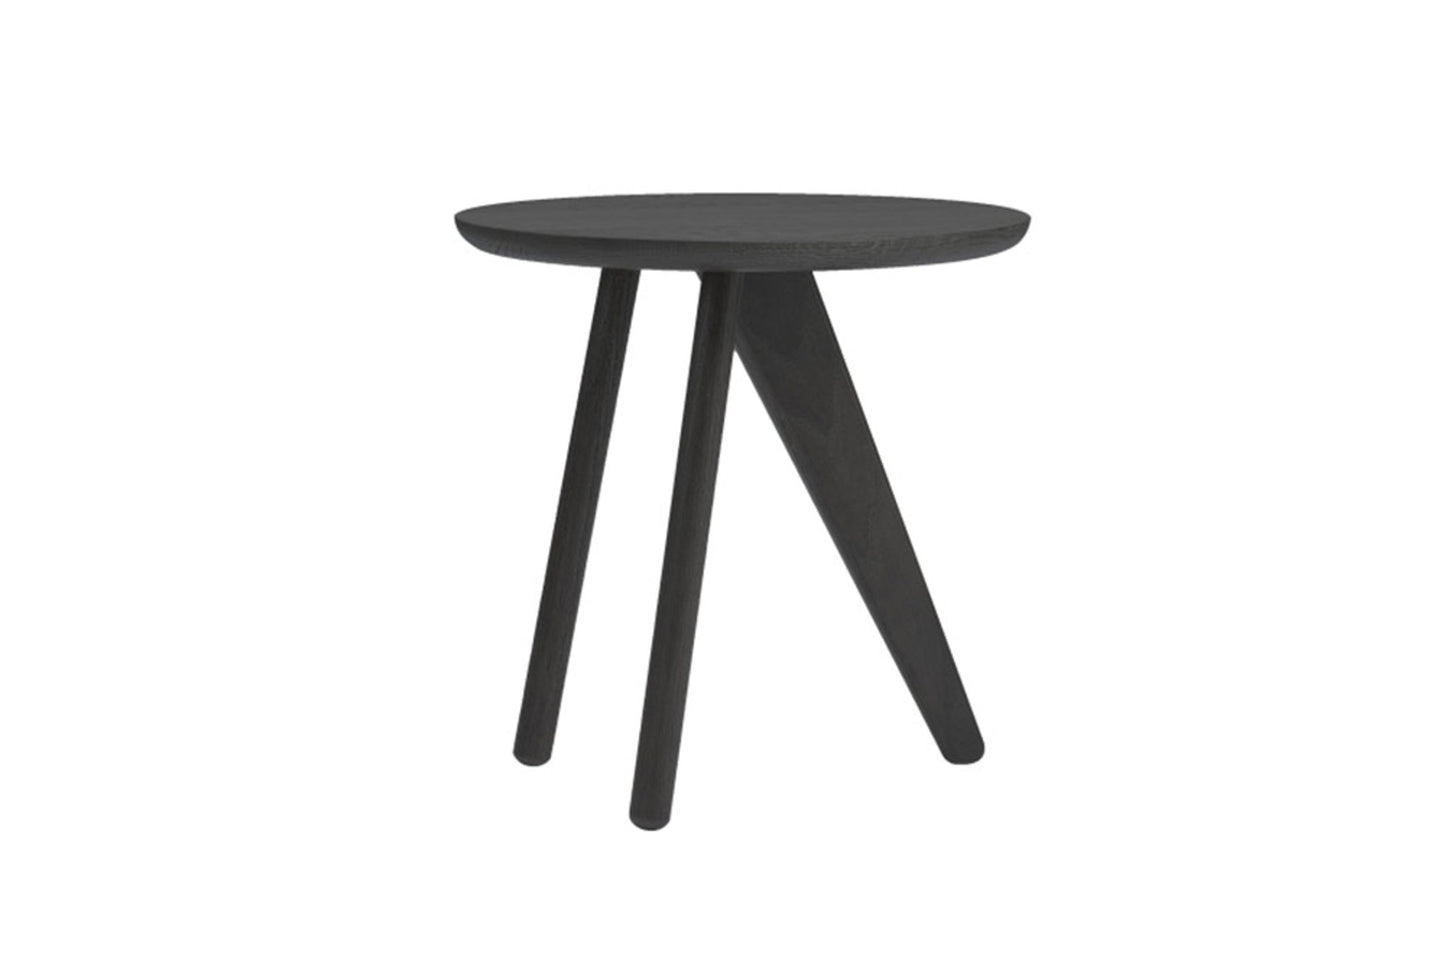 NORR11 FIN SIDE TABLE - $640.00